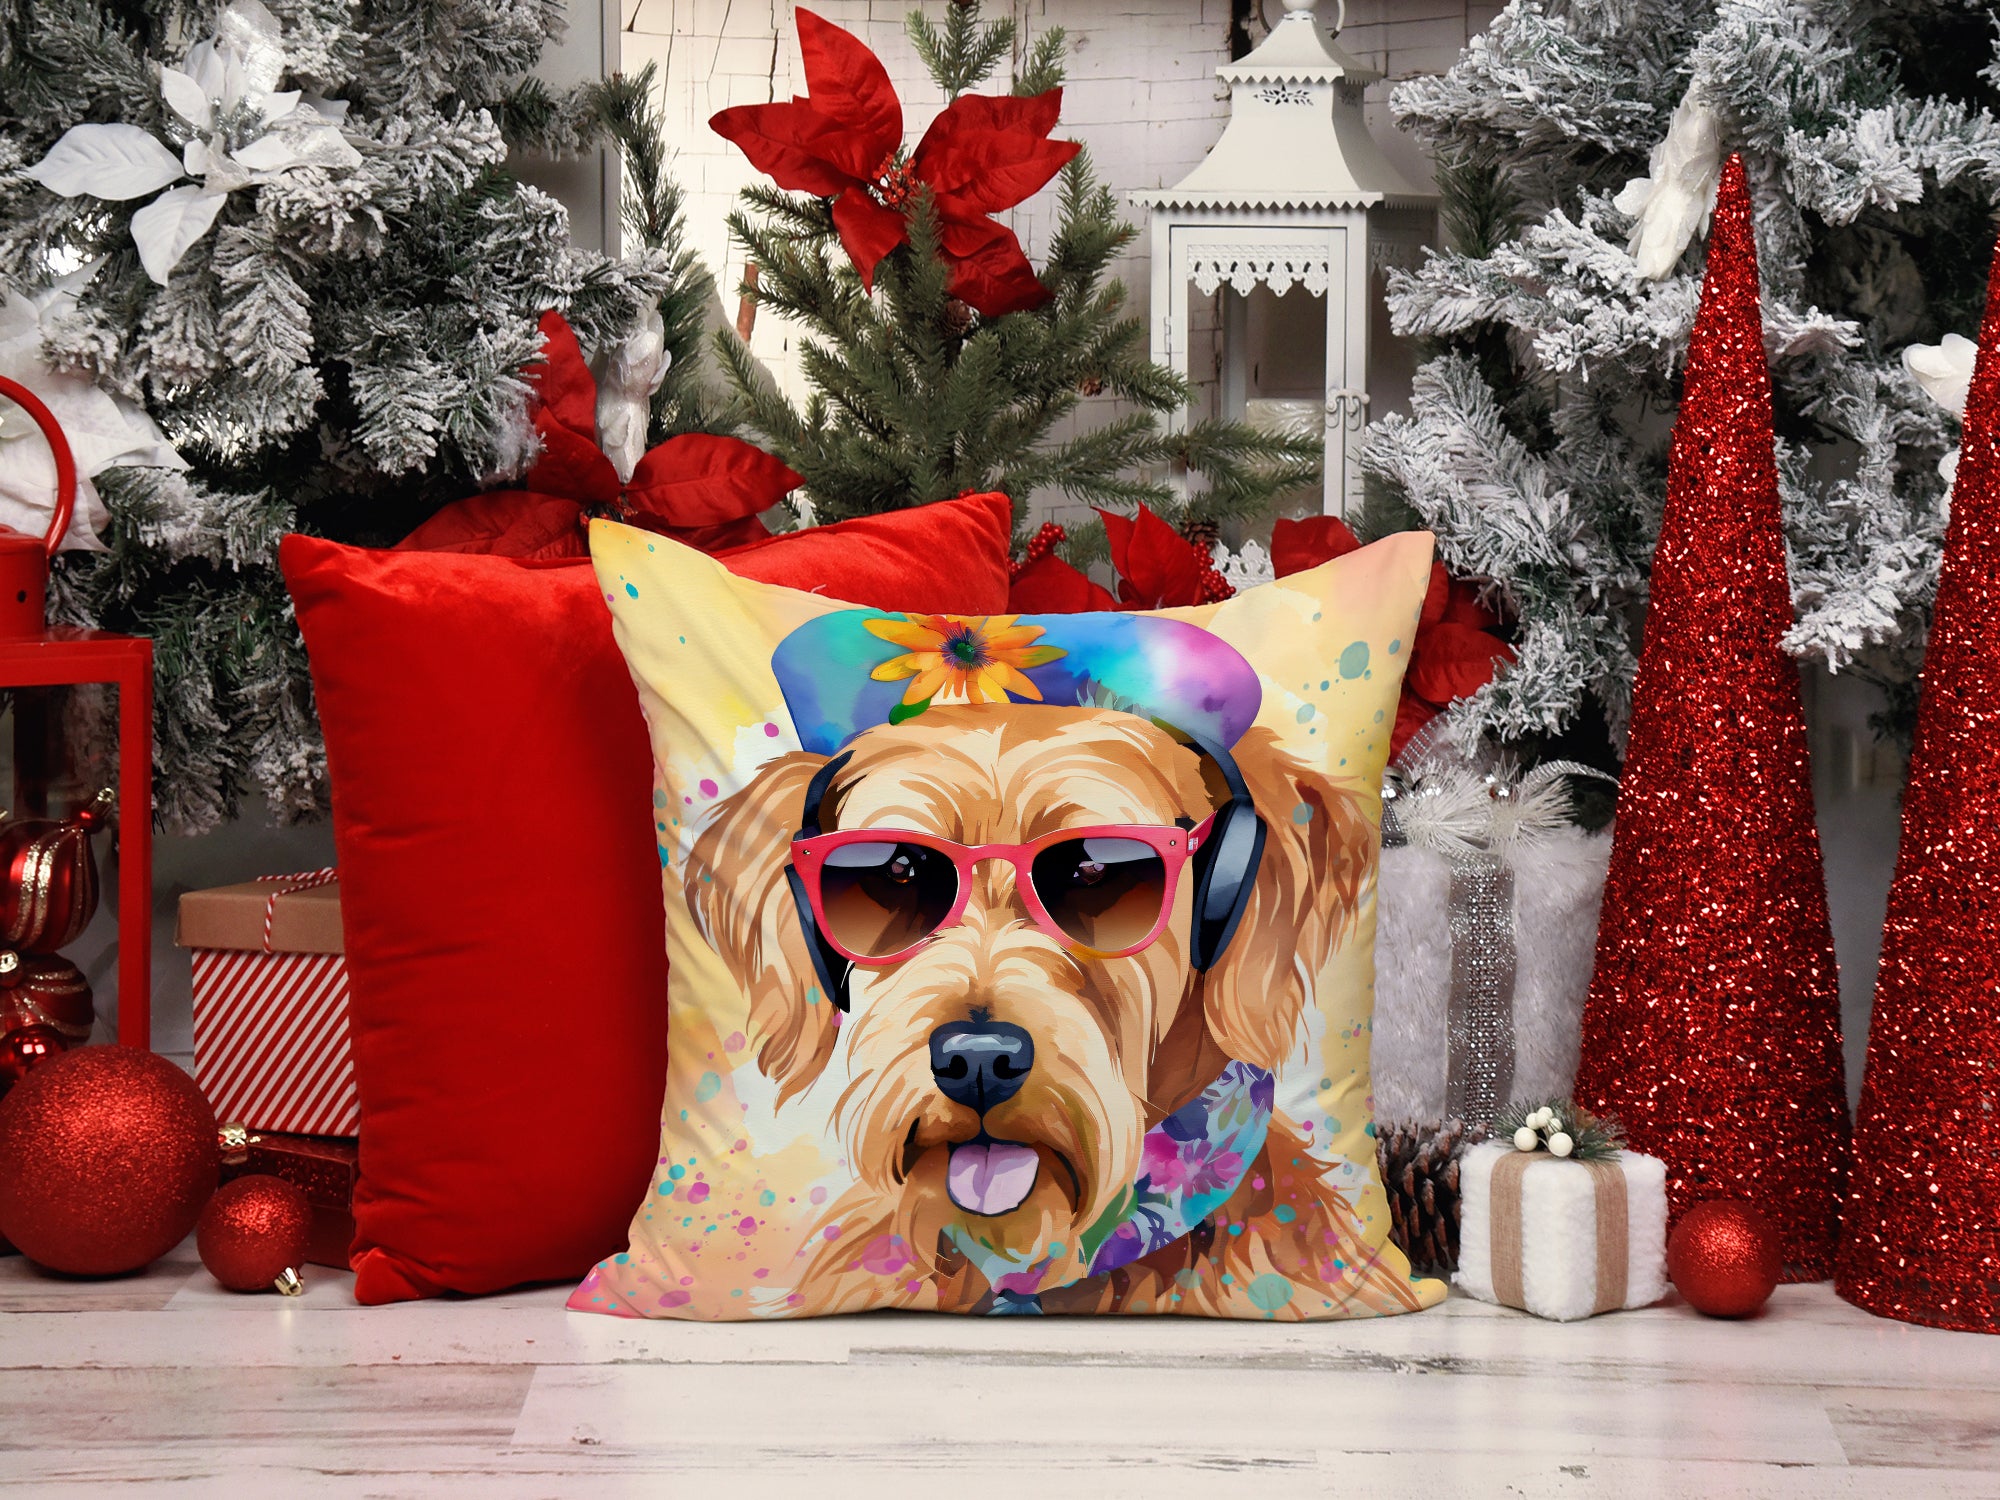 Buy this Airedale Terrier Hippie Dawg Fabric Decorative Pillow